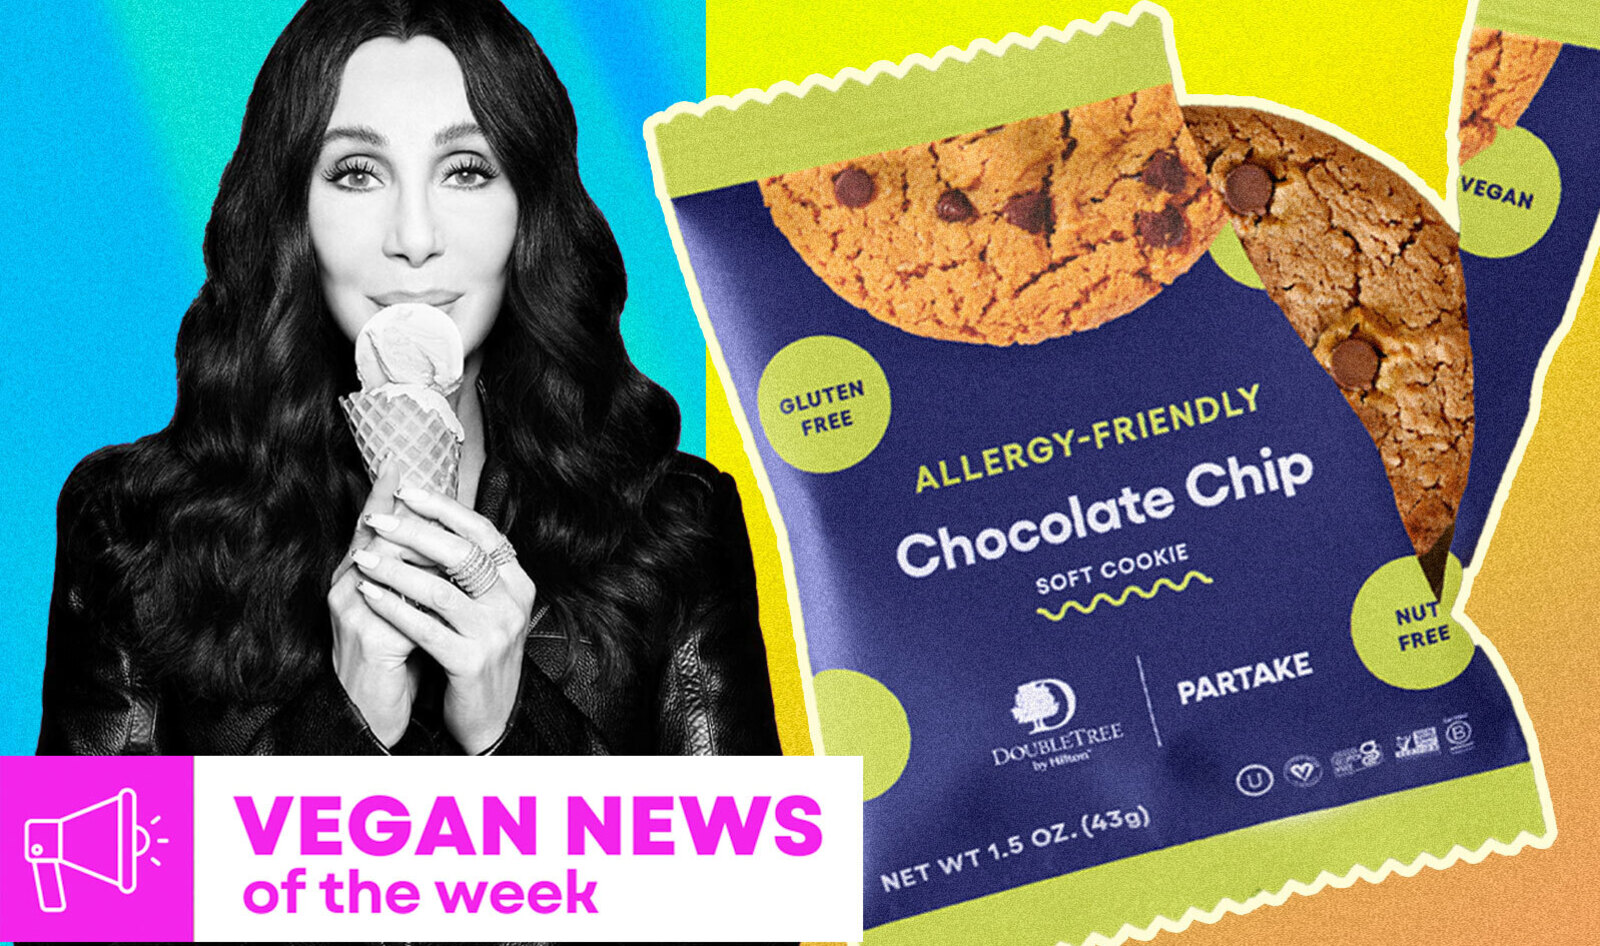 Vegan Food News of the Week: Cher's Gelato, DoubleTree's Chocolate Chip Cookies, and More